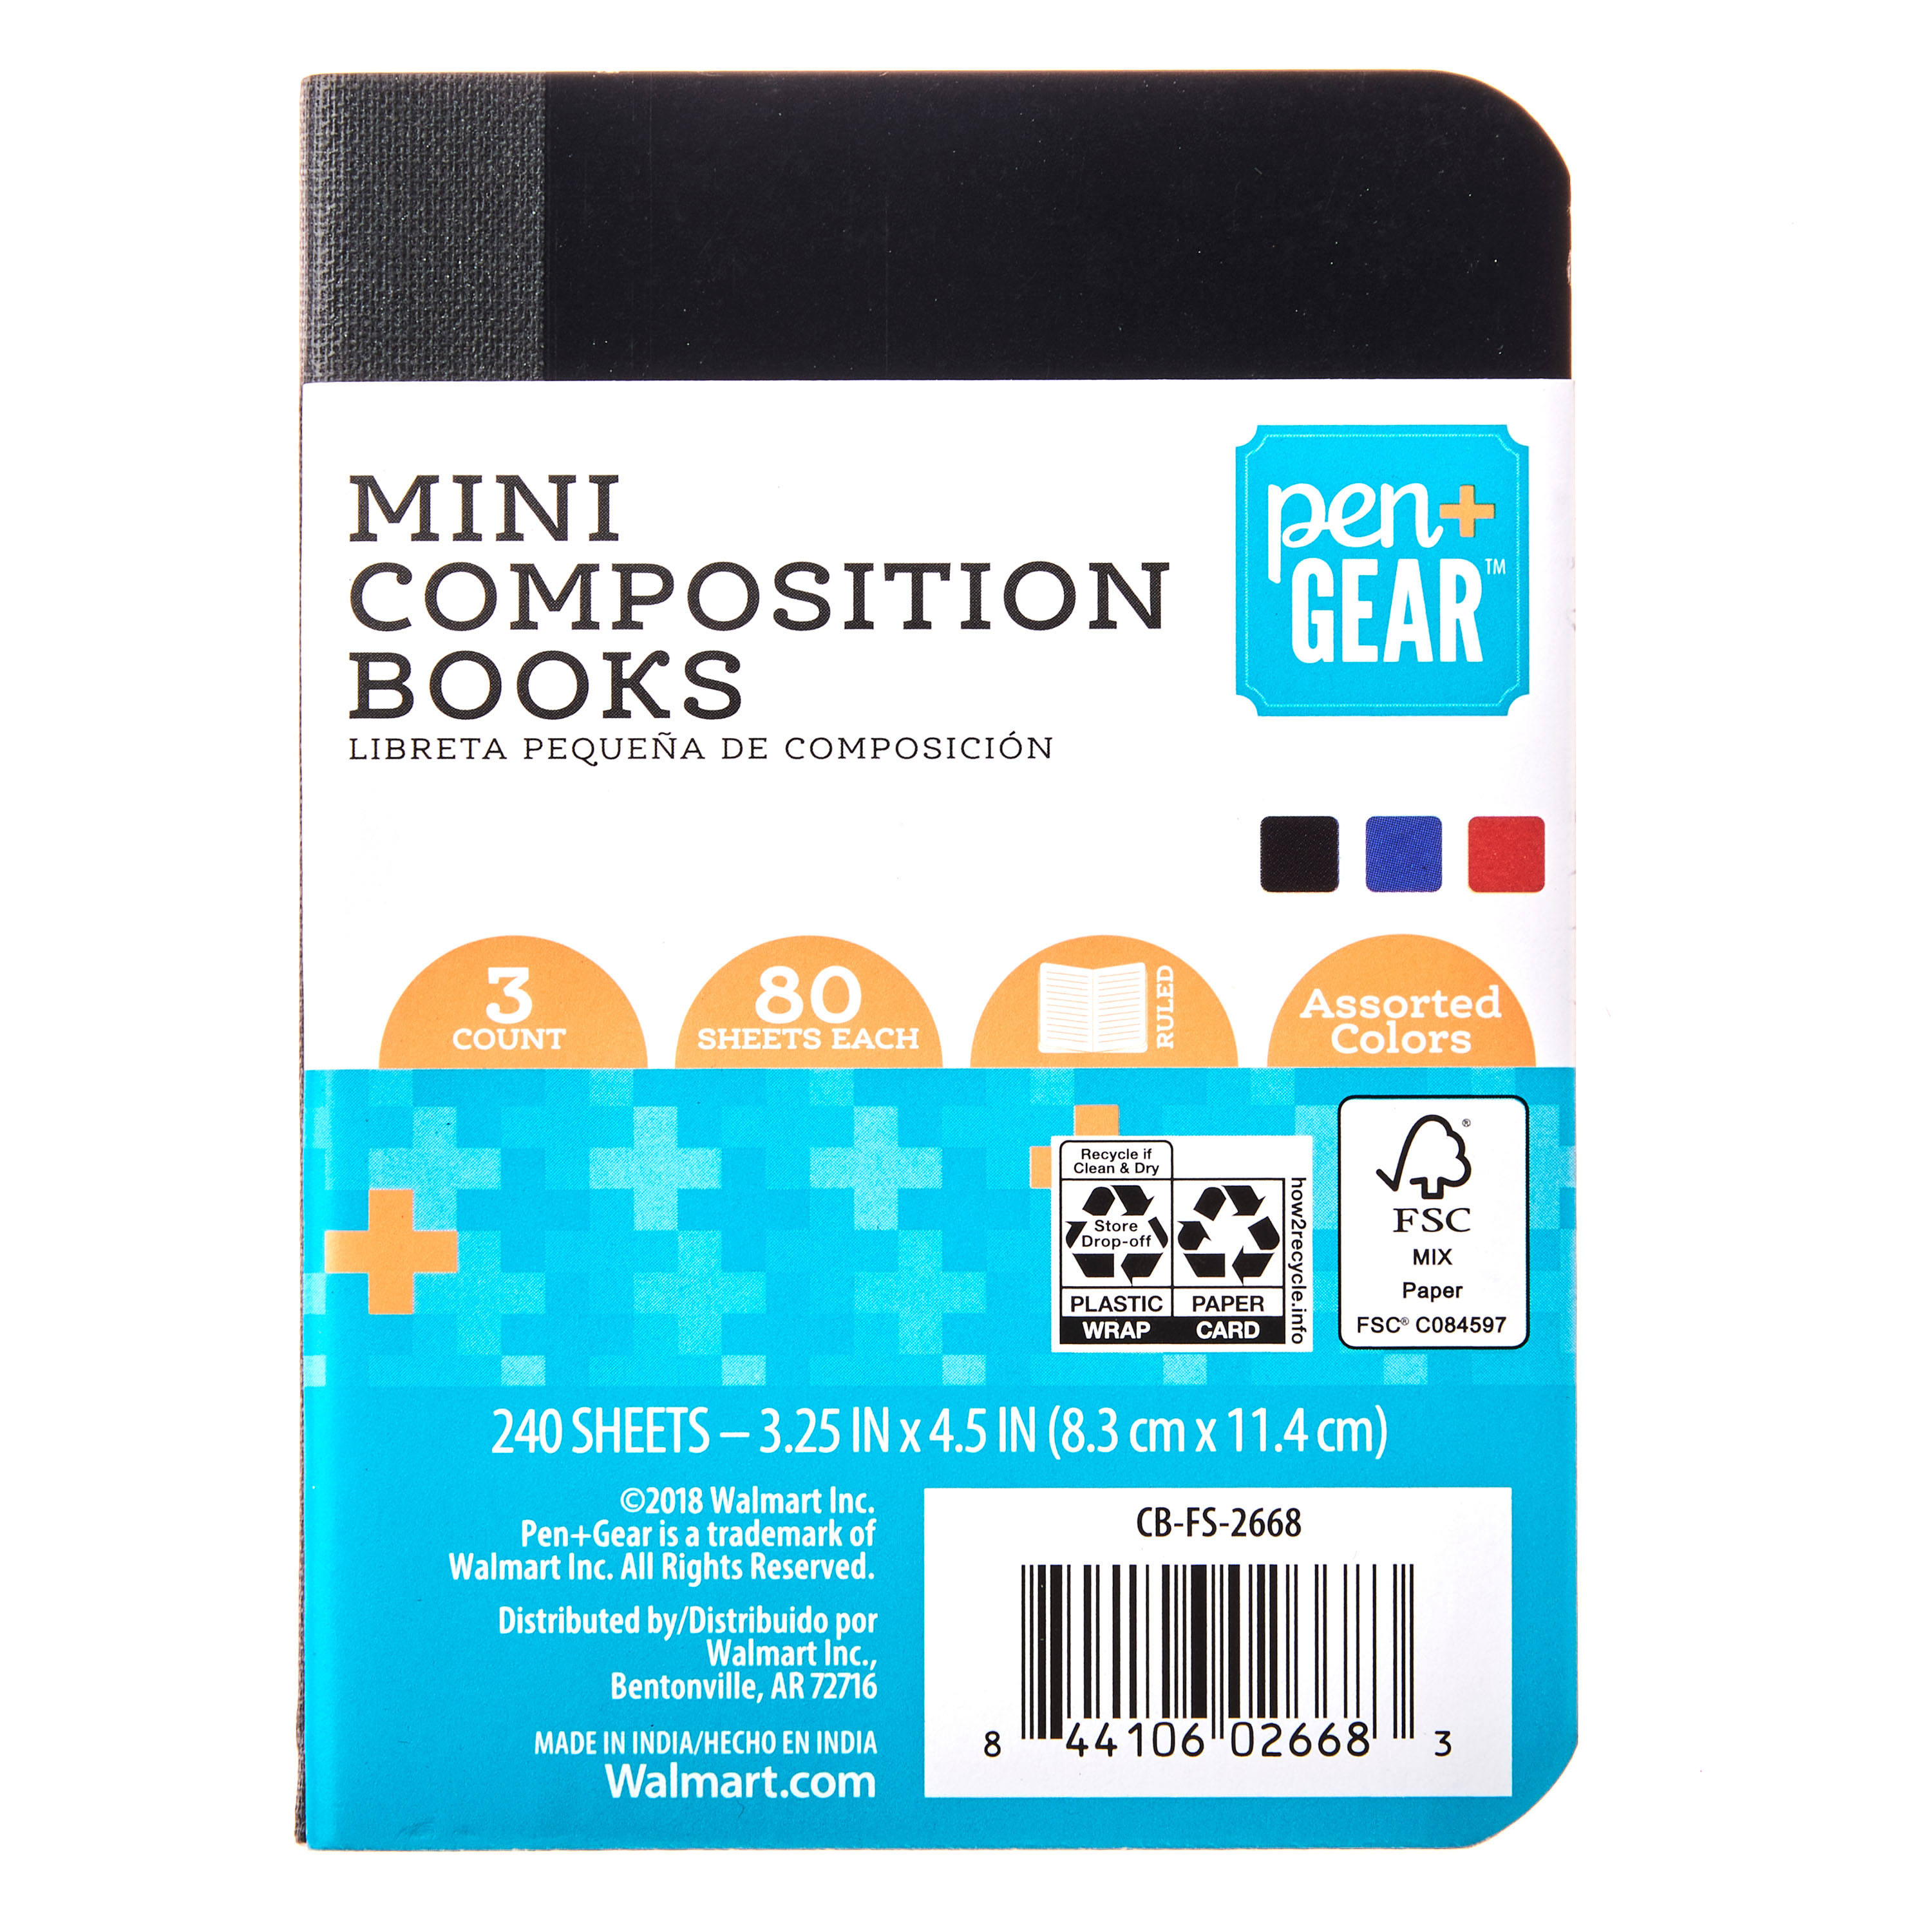 Pen + Gear 3-Pack Mini Composition Book, 3.25" x 4.5" x 4.55", 80 Sheets, Black, Blue and Red - image 1 of 5